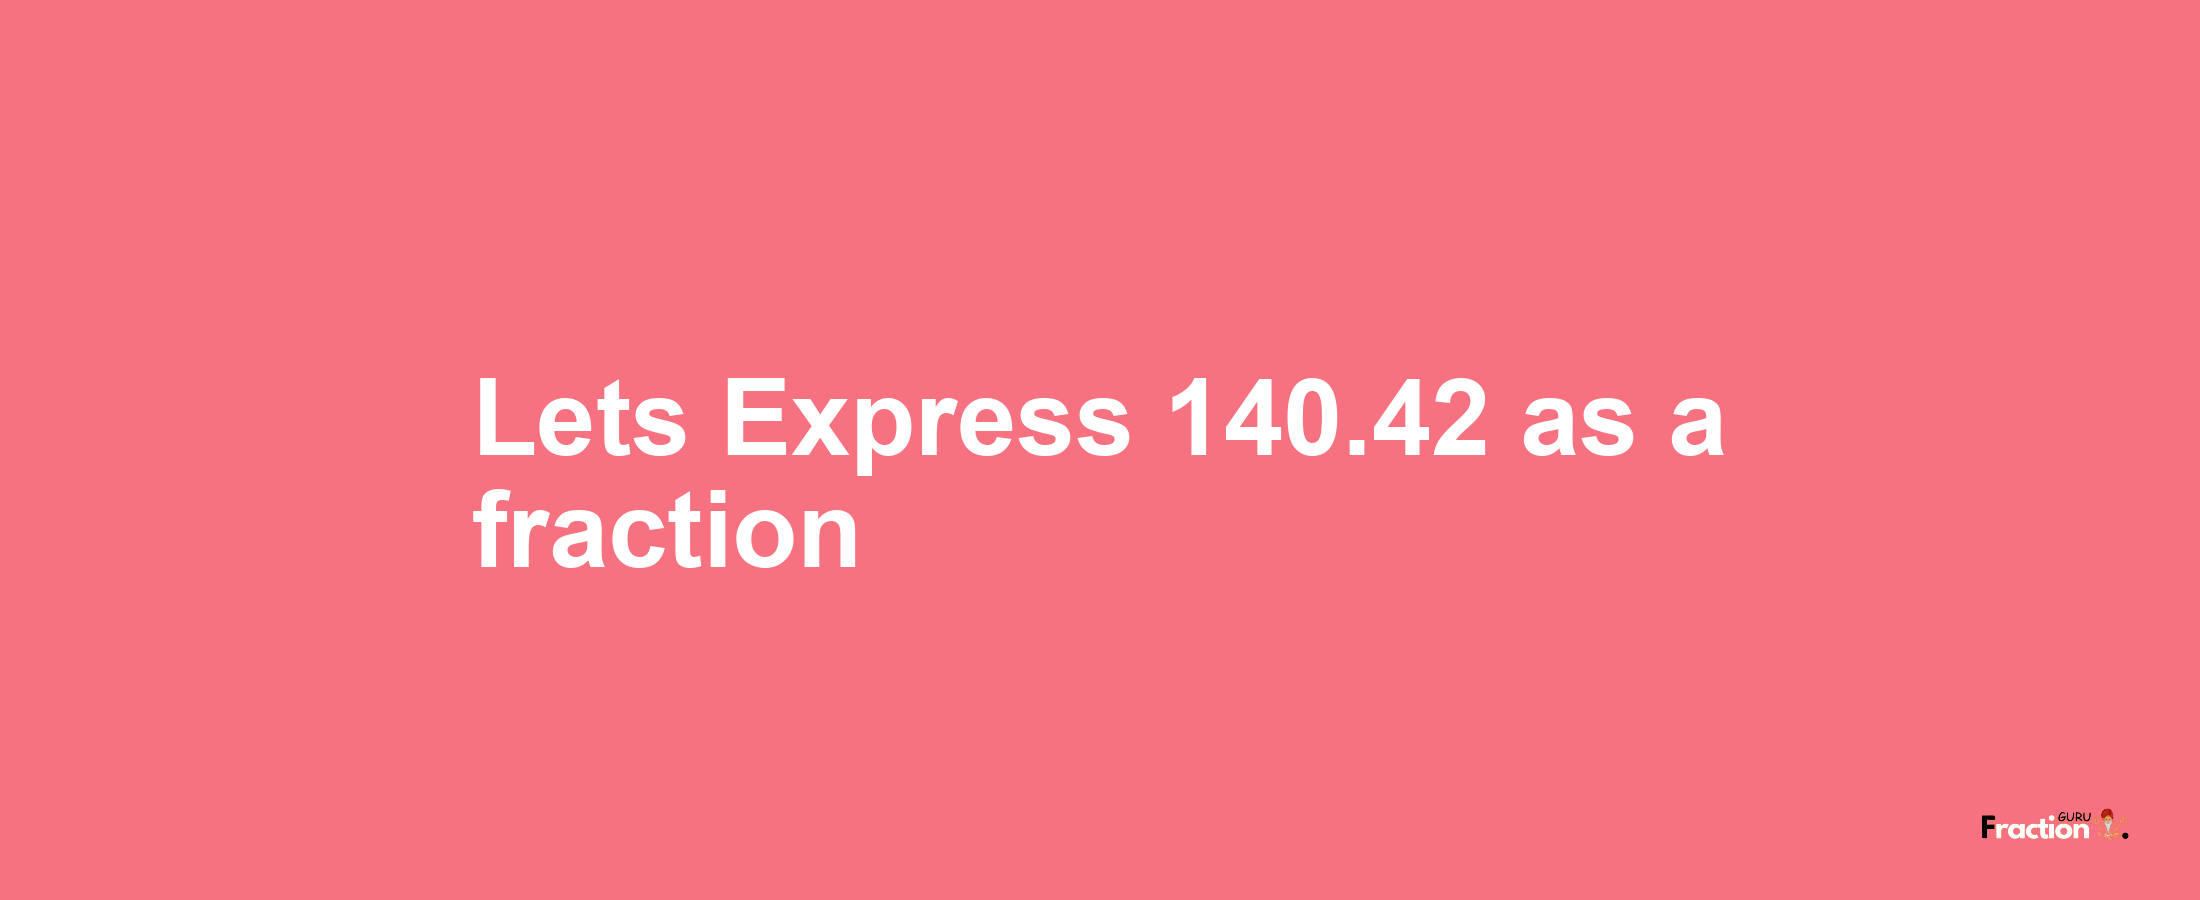 Lets Express 140.42 as afraction